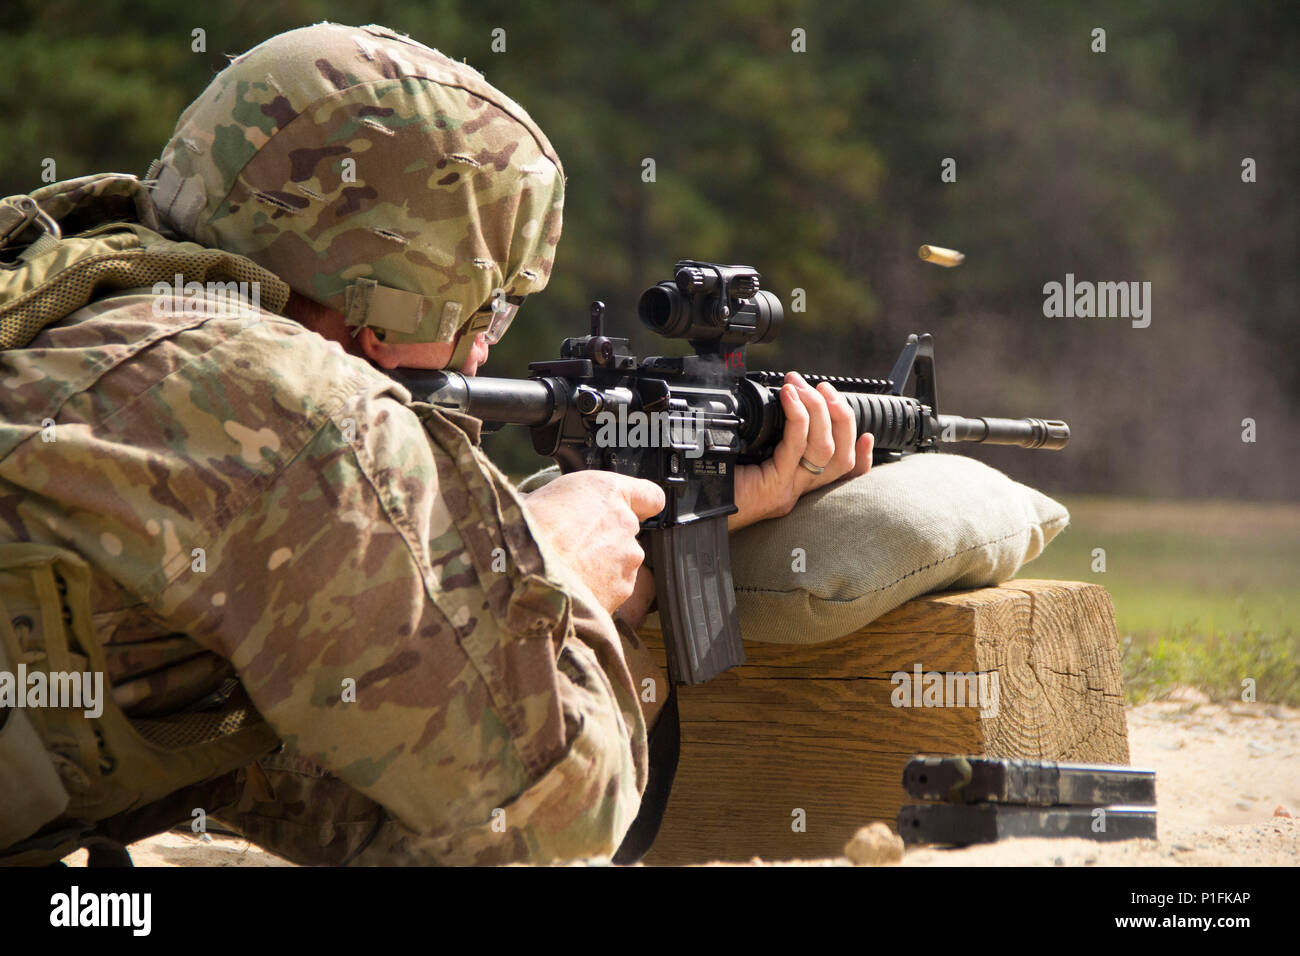 A Soldier assigned to 3rd Military Information Support Battalion, 4th Military Information Support Group, engages pop-up targets during an M4 carbine qualification range, Oct. 27, 2016, at Fort Bragg, North Carolina. Stock Photo